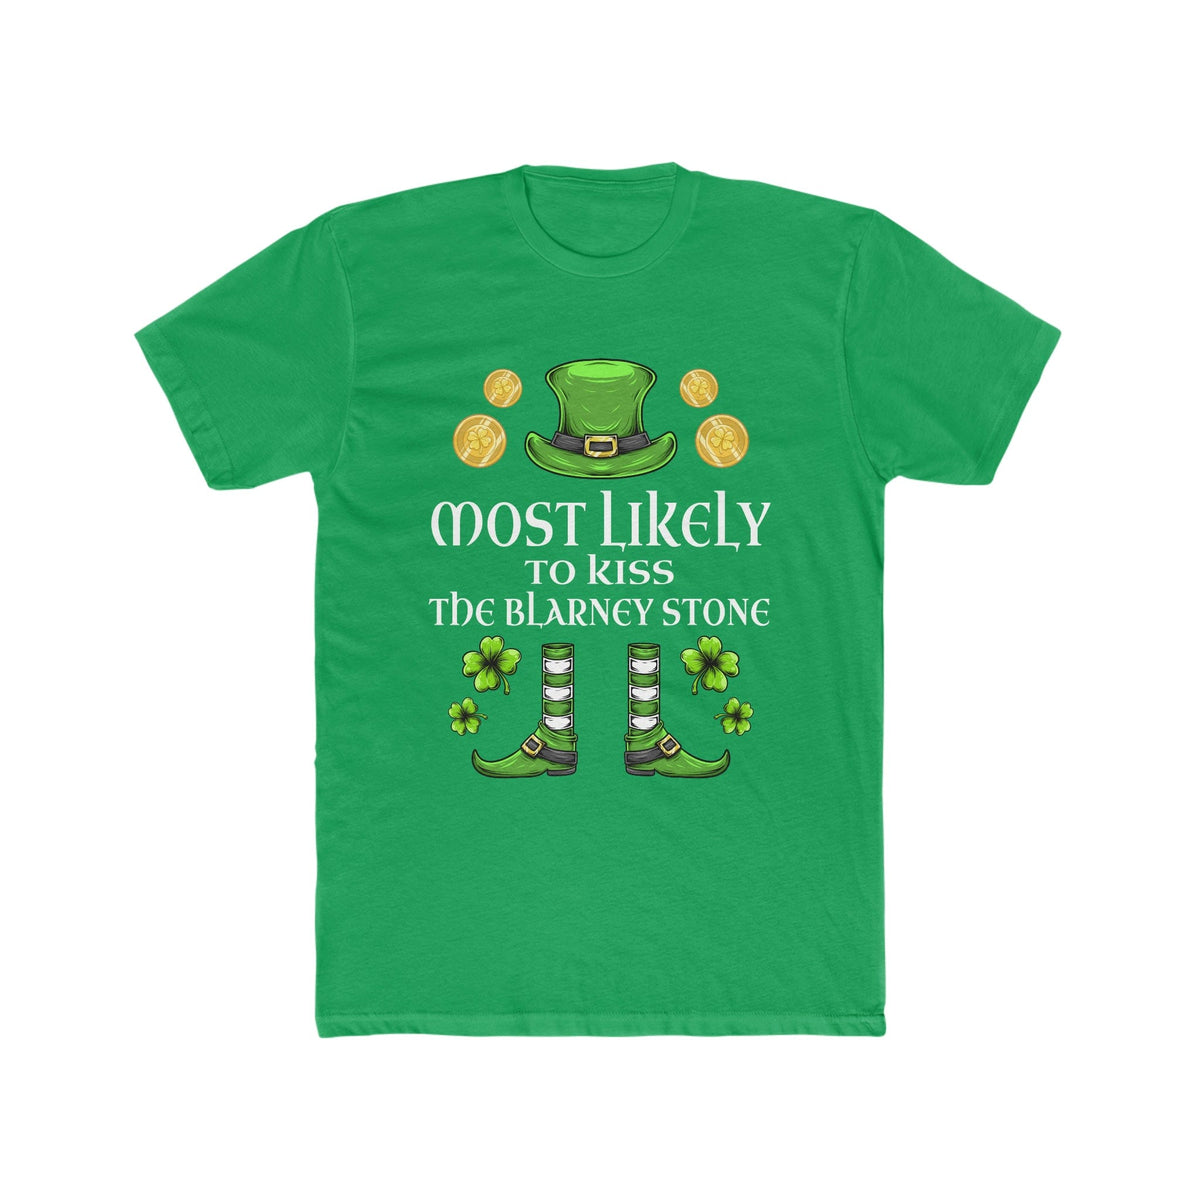 Most likely To Kiss THE BLARNEY STONE Premium Unisex Shirt